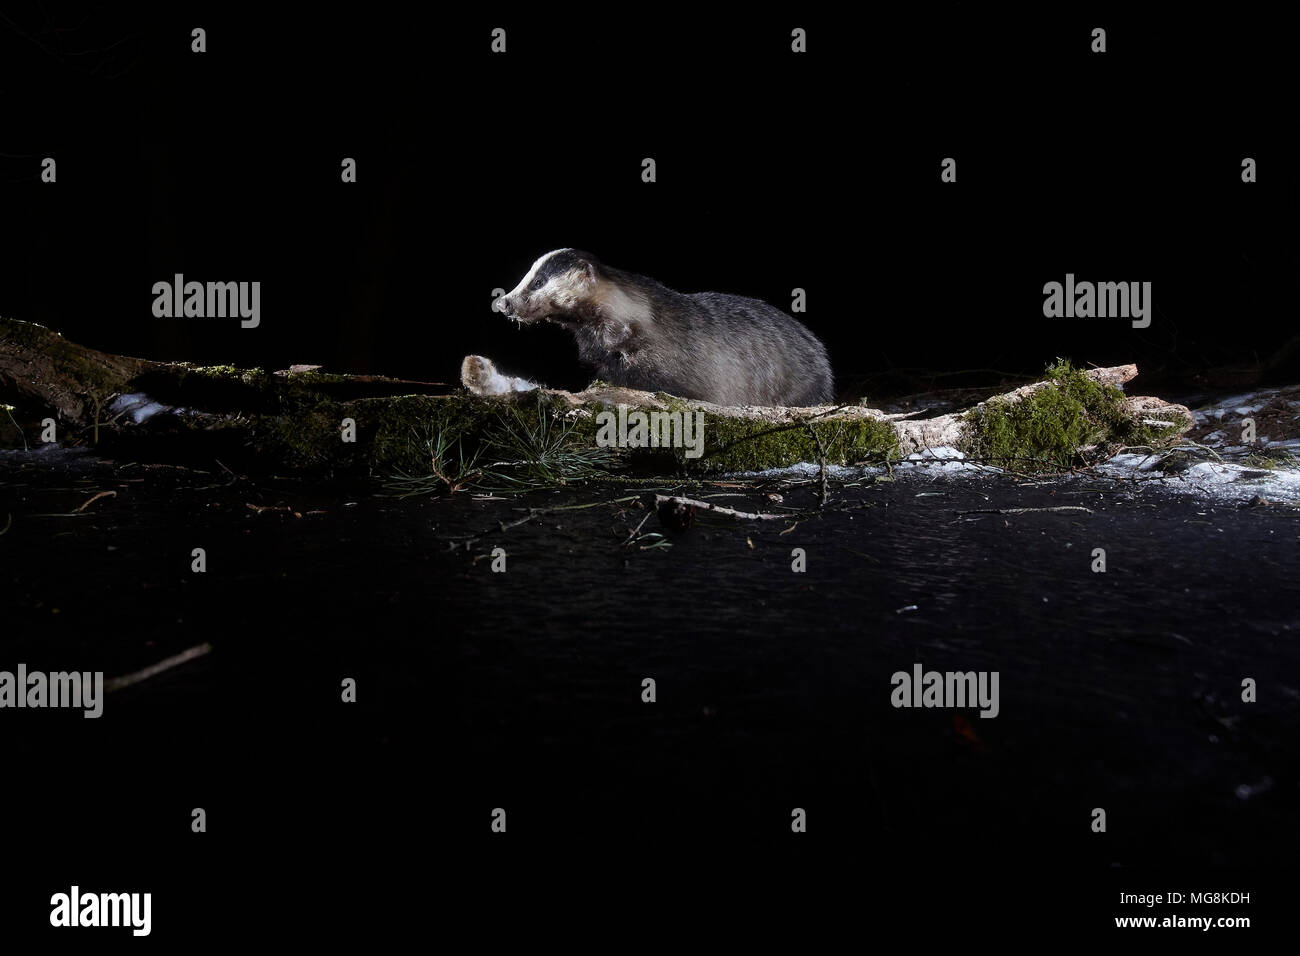 European Badger, Meles meles, visiting a log and frozen pond at night, East yorkshire, UK. Photographed using a remote DSLR camera trap and flash. Stock Photo